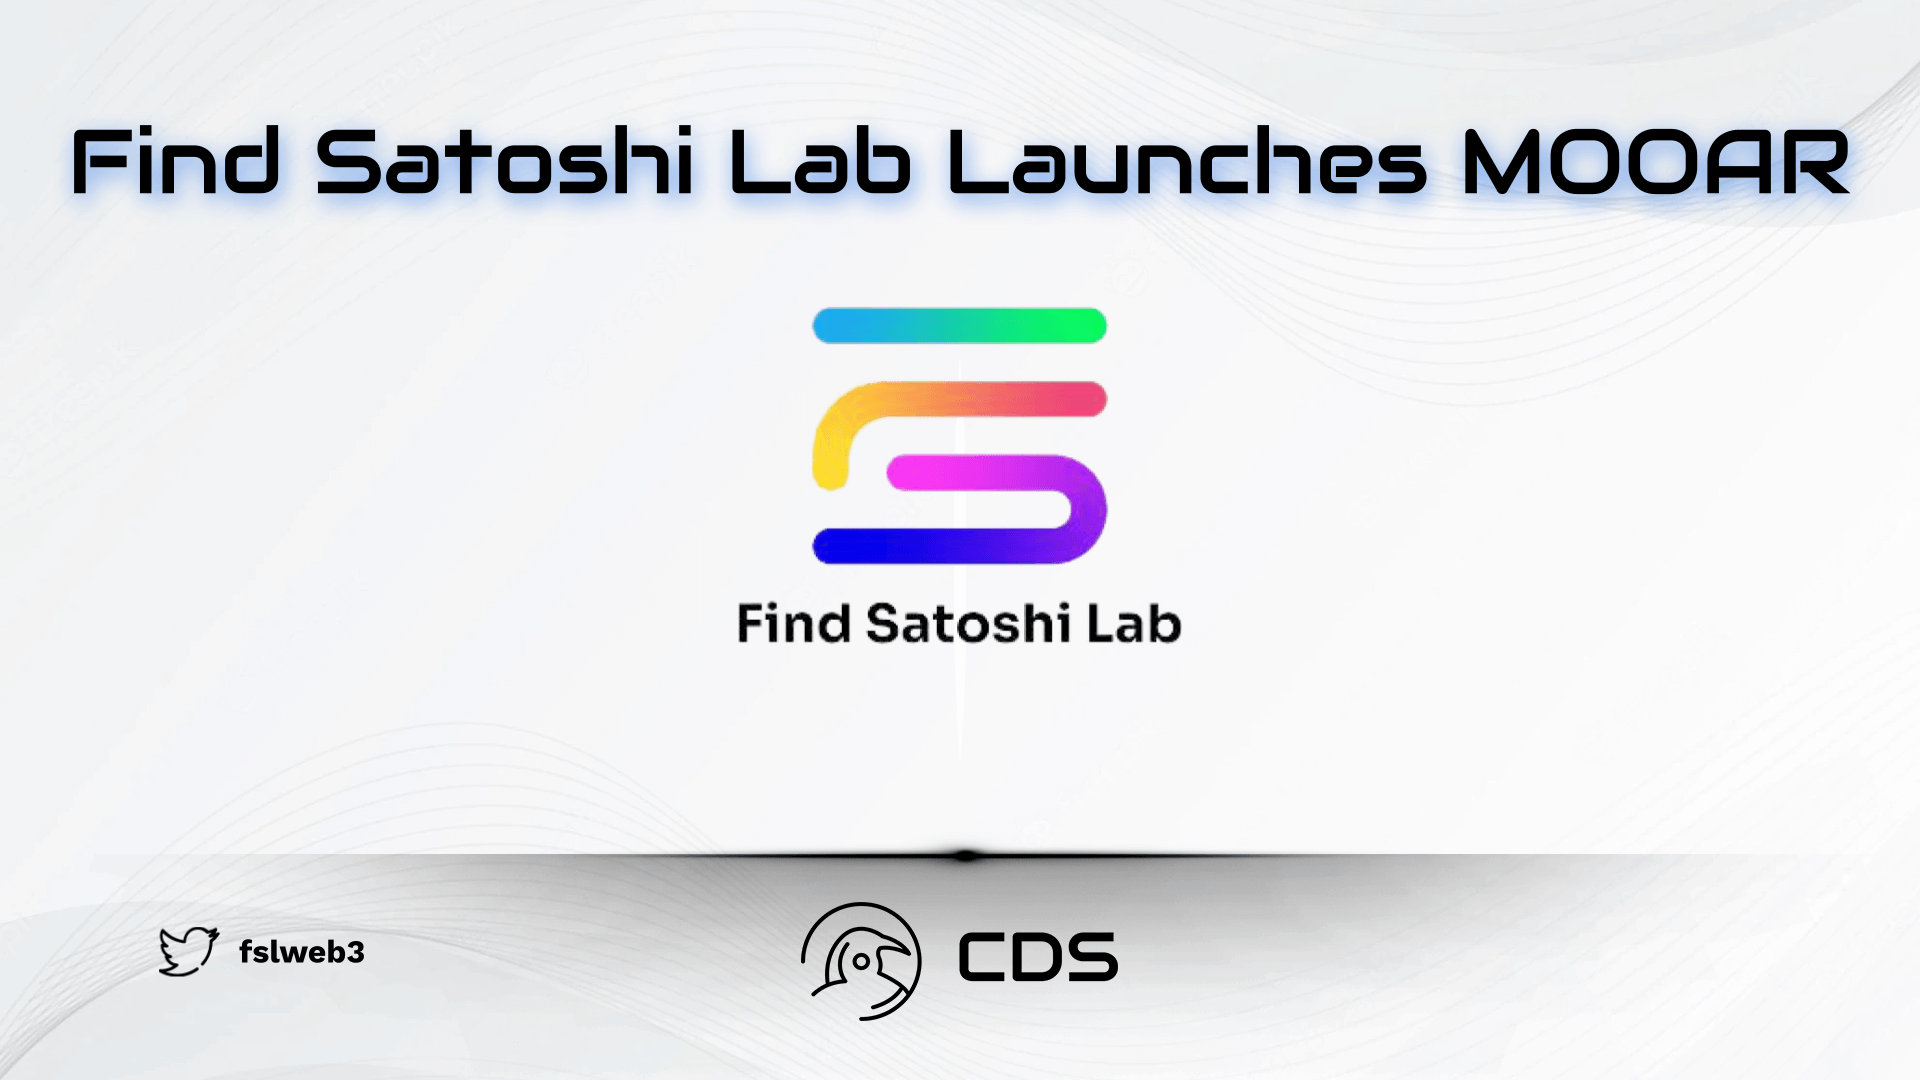 Find Satoshi Lab Launches MOOAR